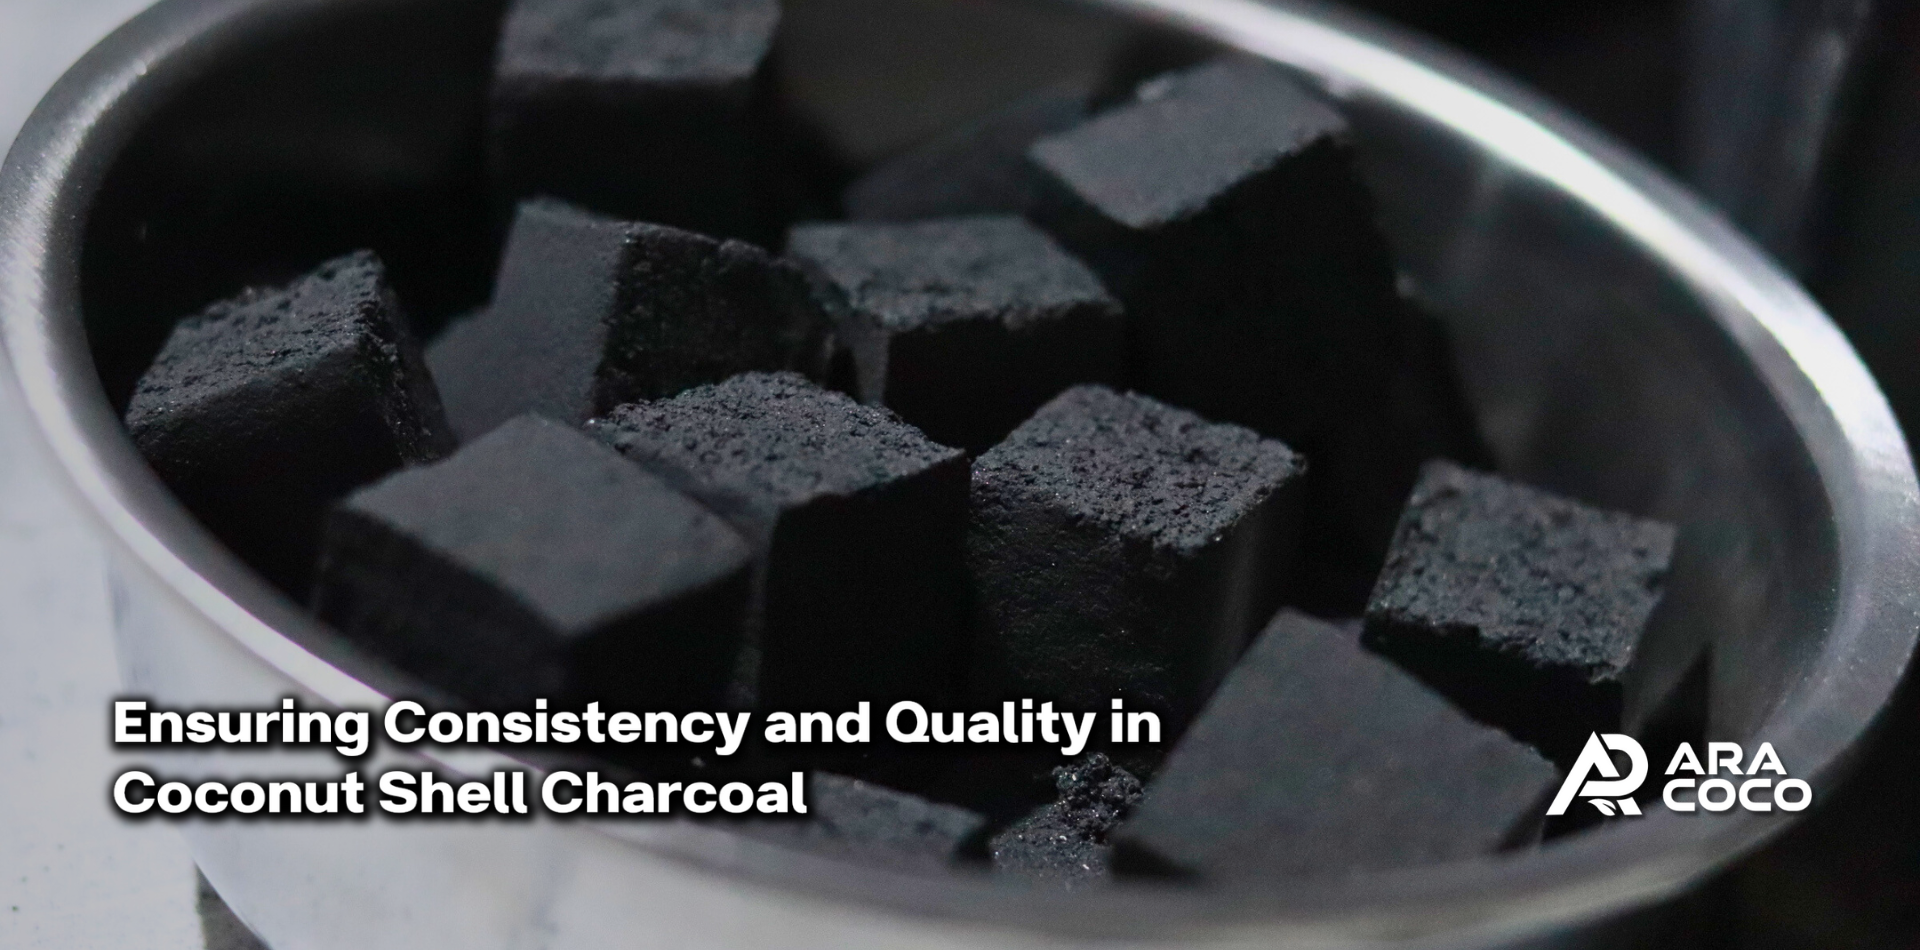 Ensuring Consistency and Quality in Coconut Shell Charcoal